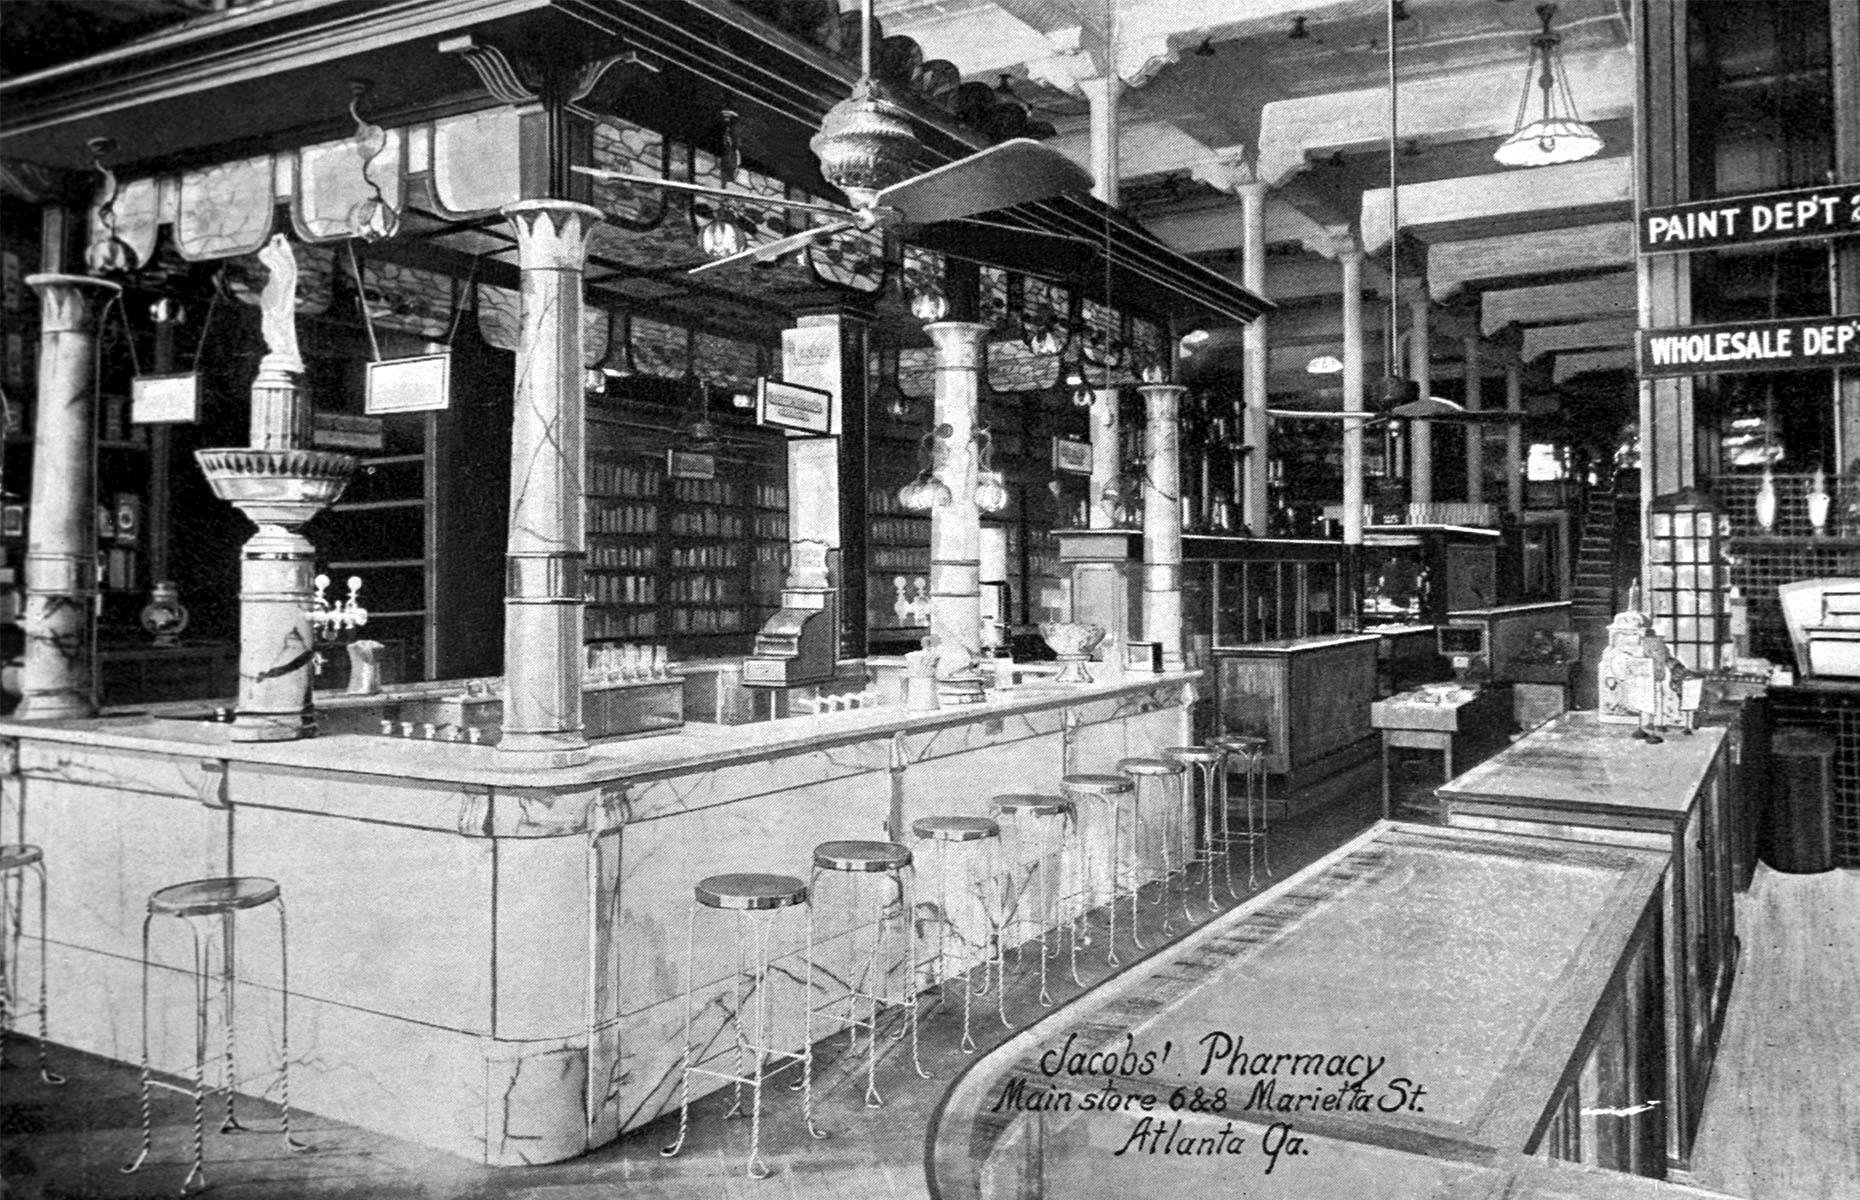 When the famous Coca-Cola bottle was first introduced, it was a landmark moment for the brand because it was originally only available from soda fountains. The place pictured is Jacobs' Pharmacy in Atlanta where Coca-Cola was first sold. In 1899, three businessmen – Benjamin Thomas, Joseph Whitehead and John Lupton – bought the rights to bottle Coca-Cola for just $1.